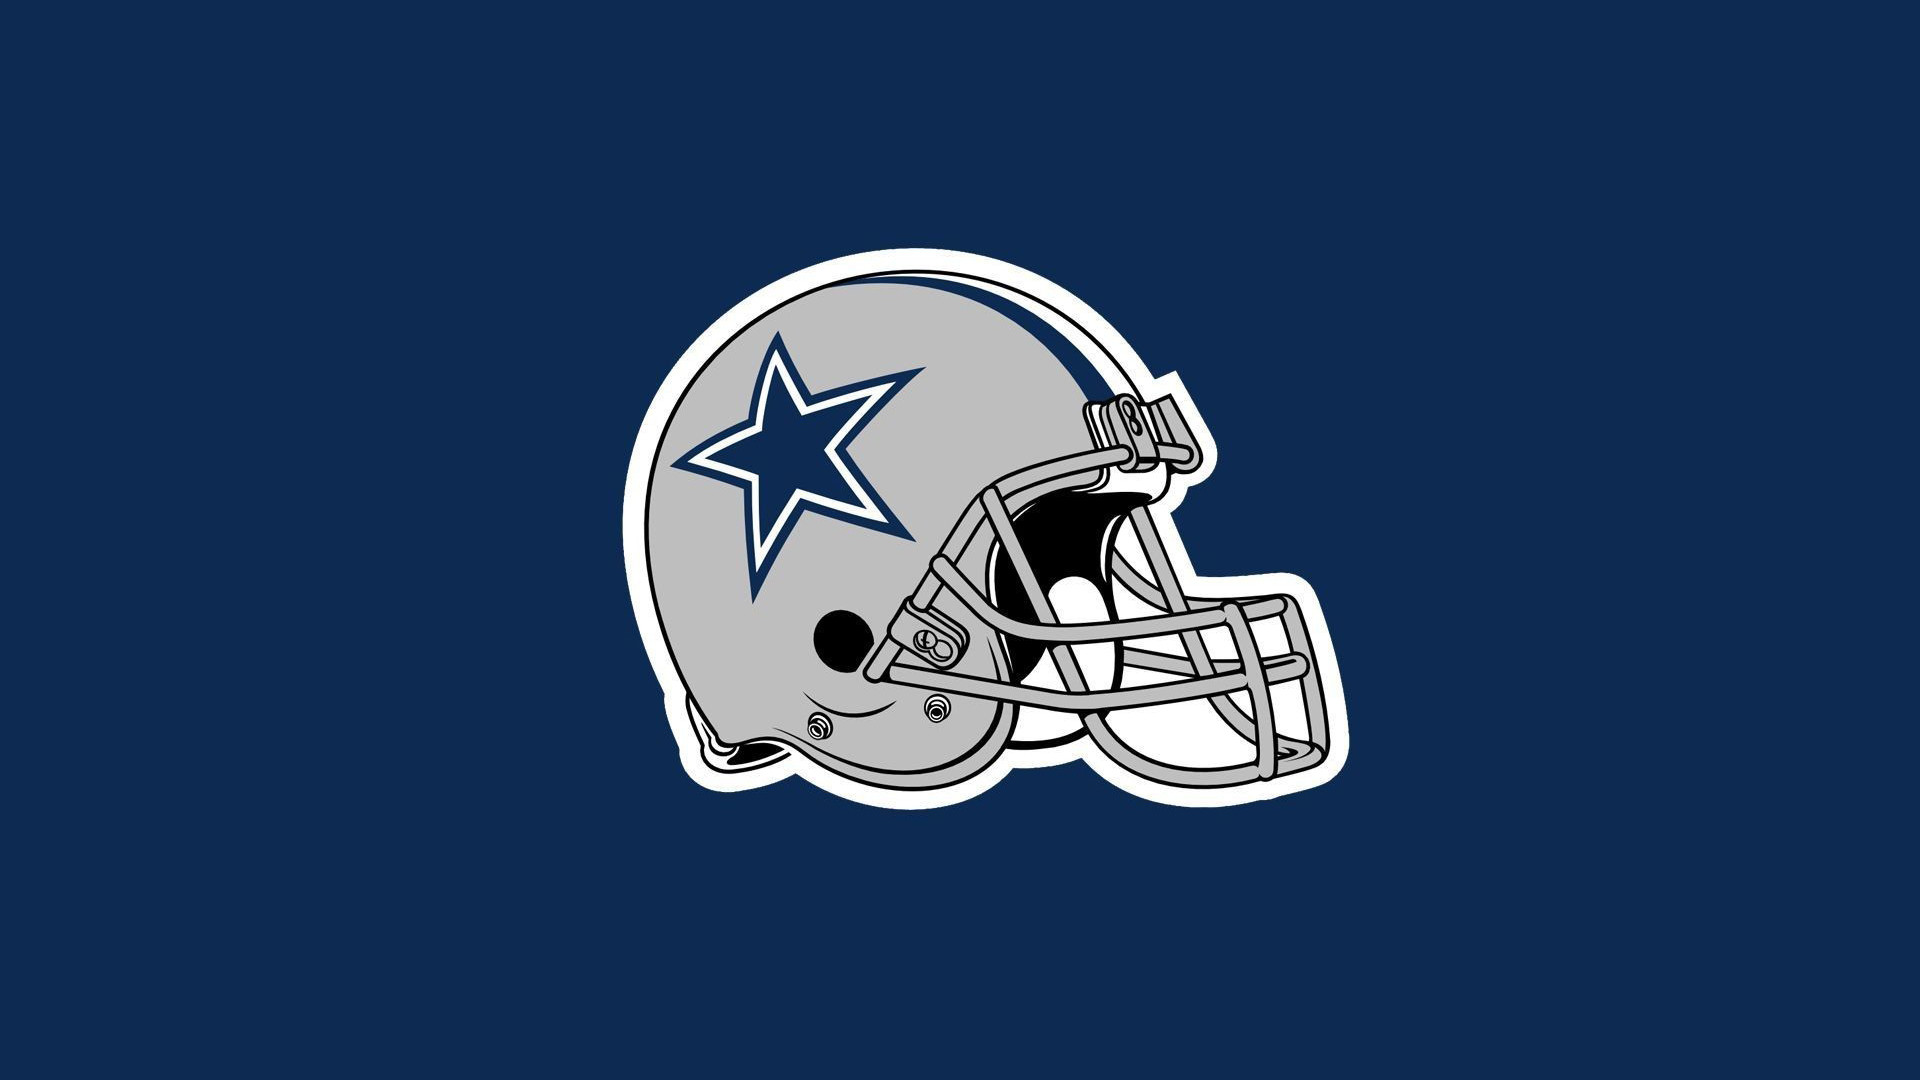 1920x1080 ... Dallas Cowboys Free Wallpaper Download with Team Helmet Picture